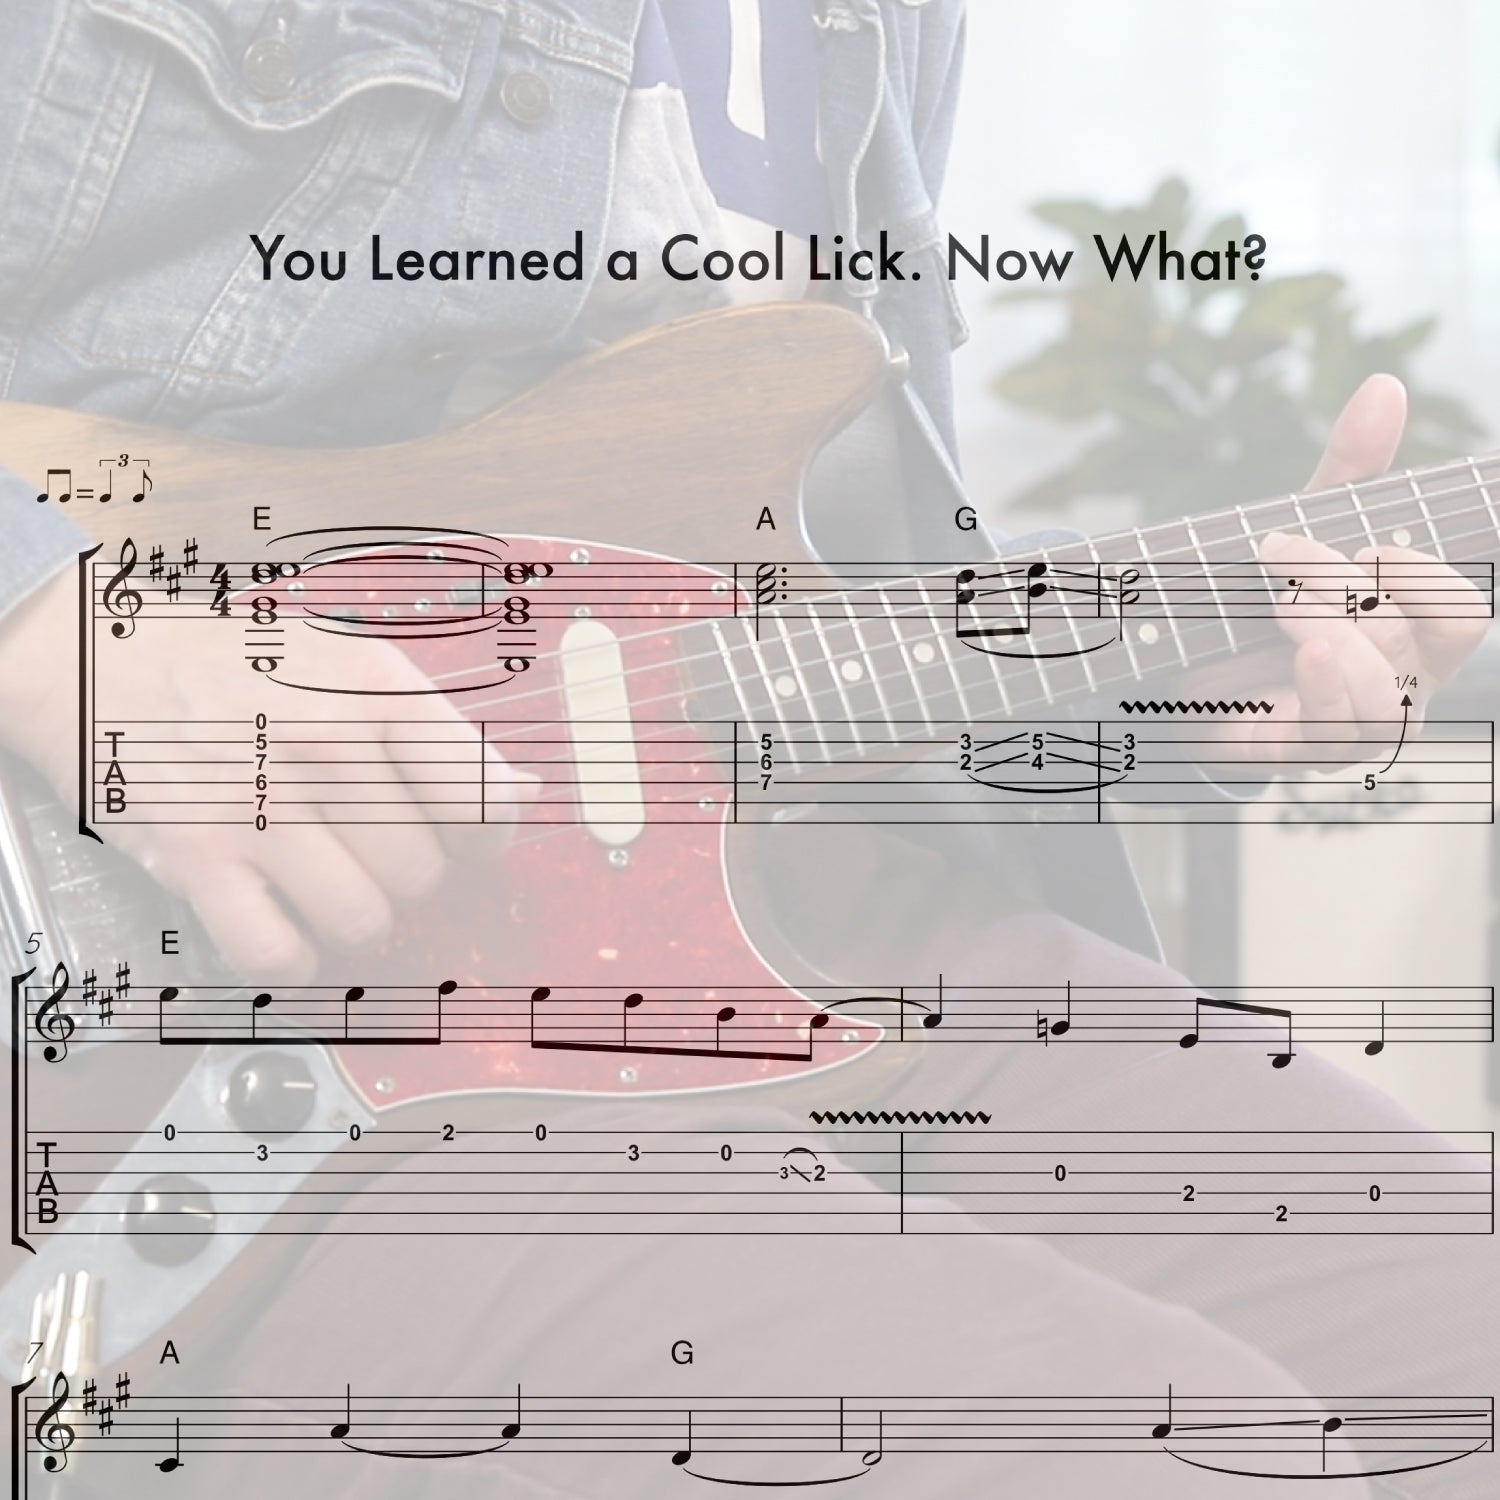 You Learned a Cool Lick. Now What?